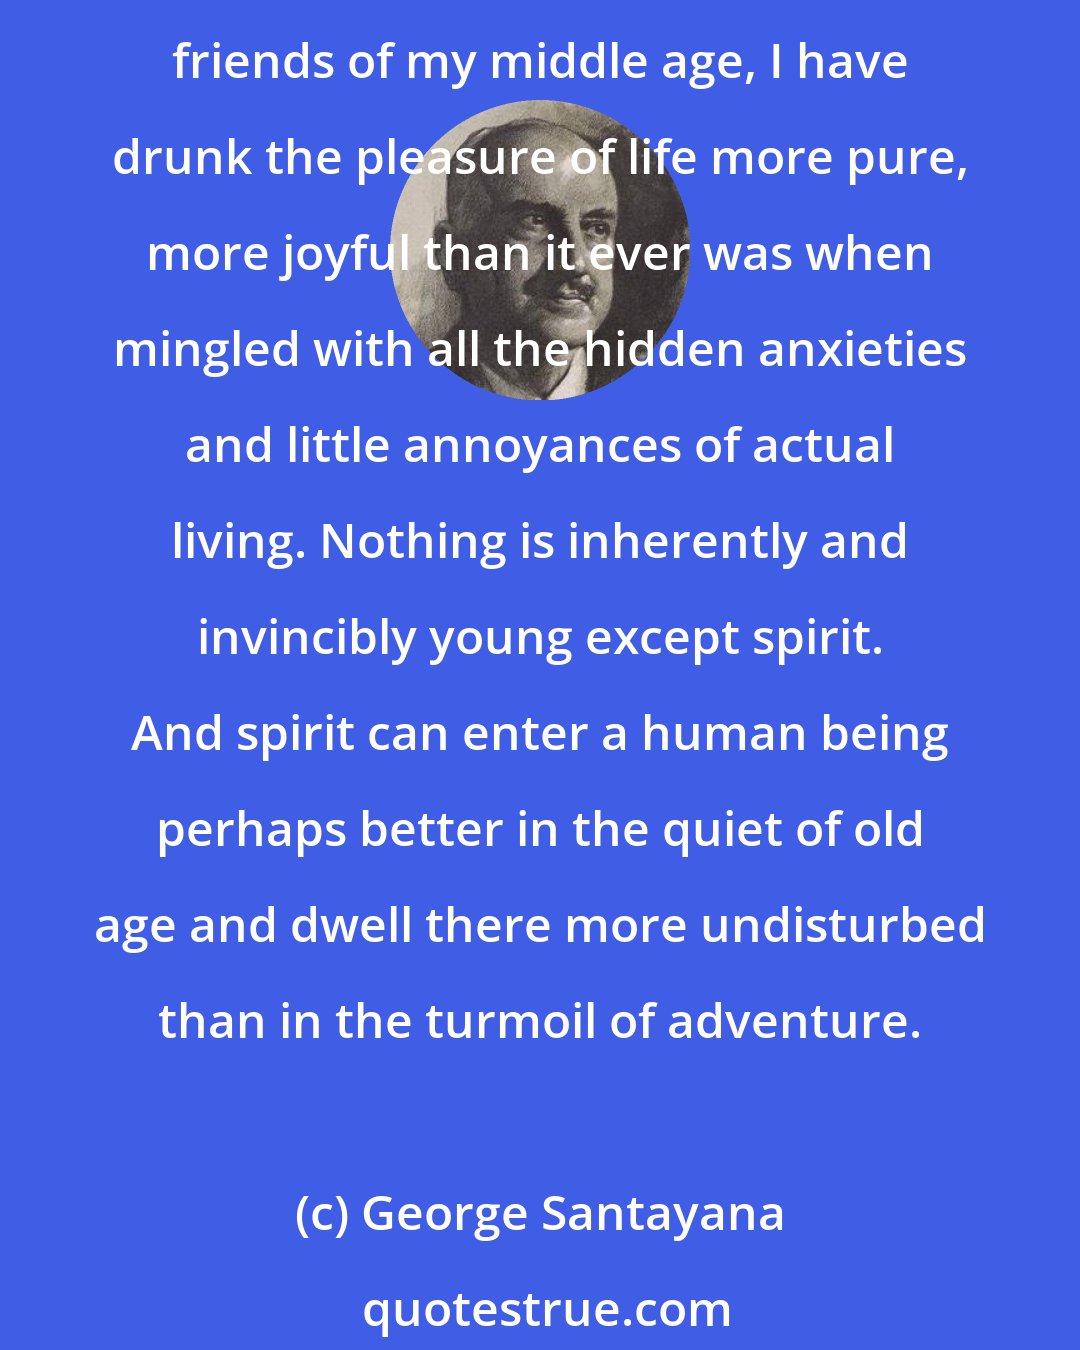 George Santayana: Never have I enjoyed youth so thoroughly as I have in my old age. In writing Dialogues in Limbo, The Last Puritan, and now all these descriptions of the friends of my youth and the young friends of my middle age, I have drunk the pleasure of life more pure, more joyful than it ever was when mingled with all the hidden anxieties and little annoyances of actual living. Nothing is inherently and invincibly young except spirit. And spirit can enter a human being perhaps better in the quiet of old age and dwell there more undisturbed than in the turmoil of adventure.